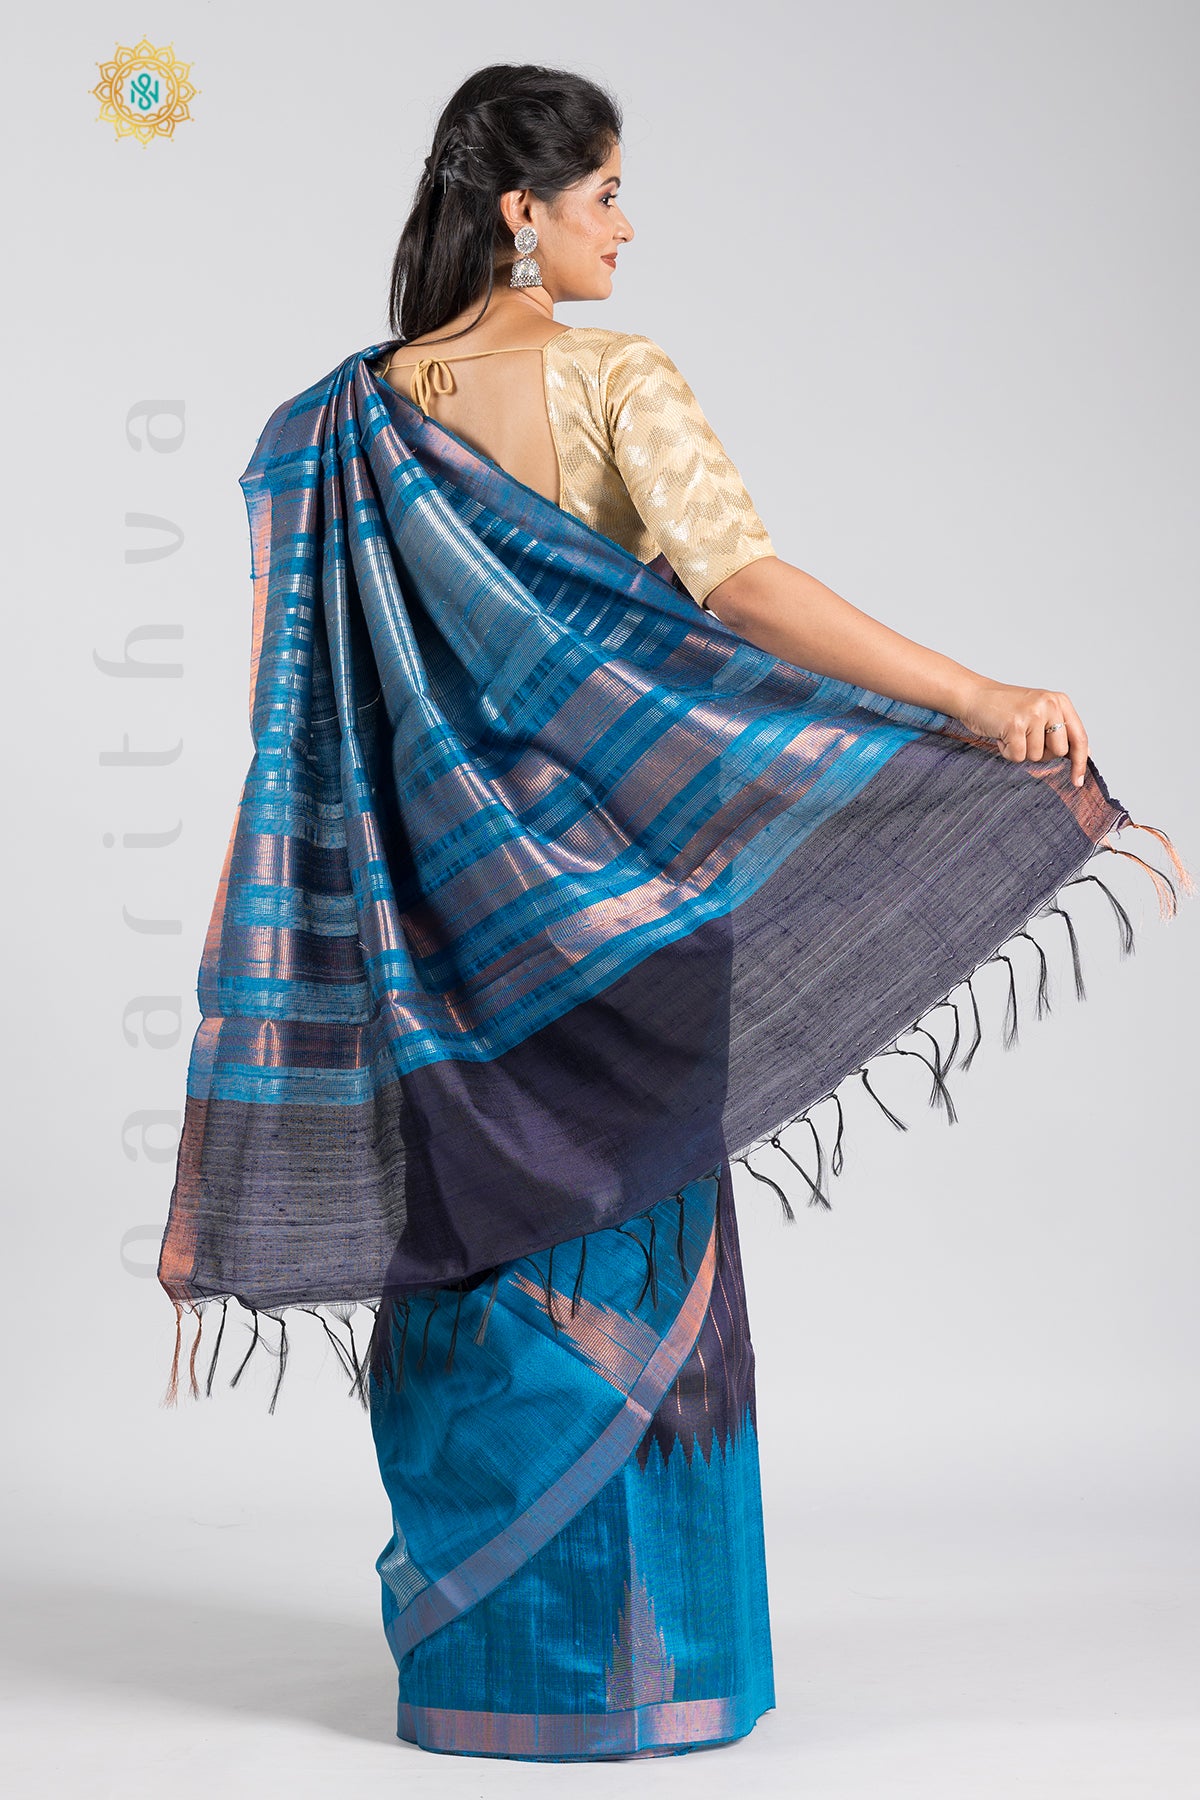 NAVY BLUE WITH SKY BLUE - PURE TUSSAR SILK WITH ZARI STRIPES ON THE BODY & TEMPLE BORDER